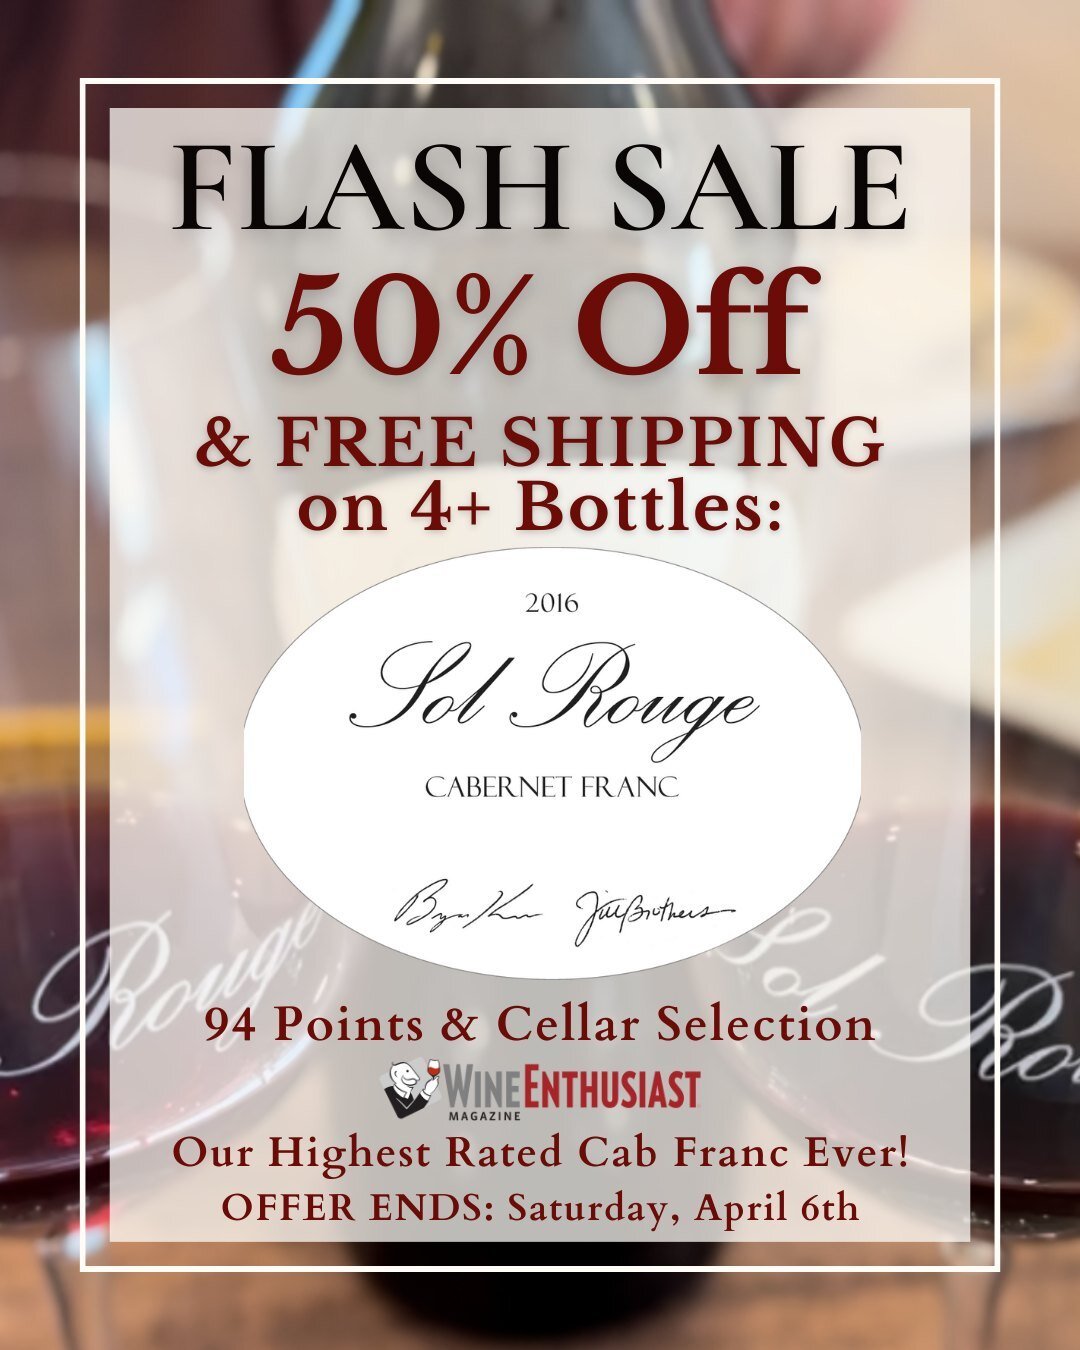 FINAL DAY for 50% OFF 94pt Cabernet Franc + Free Shipping from Sol Rouge Winery! Get our 2016 Sol Rouge Cabernet Franc, rated 94 points by Wine Enthusiast Magazine, for 50% OFF a 4 bottle set + FREE ground shipping. Offer ends Saturday, April 6th! ht